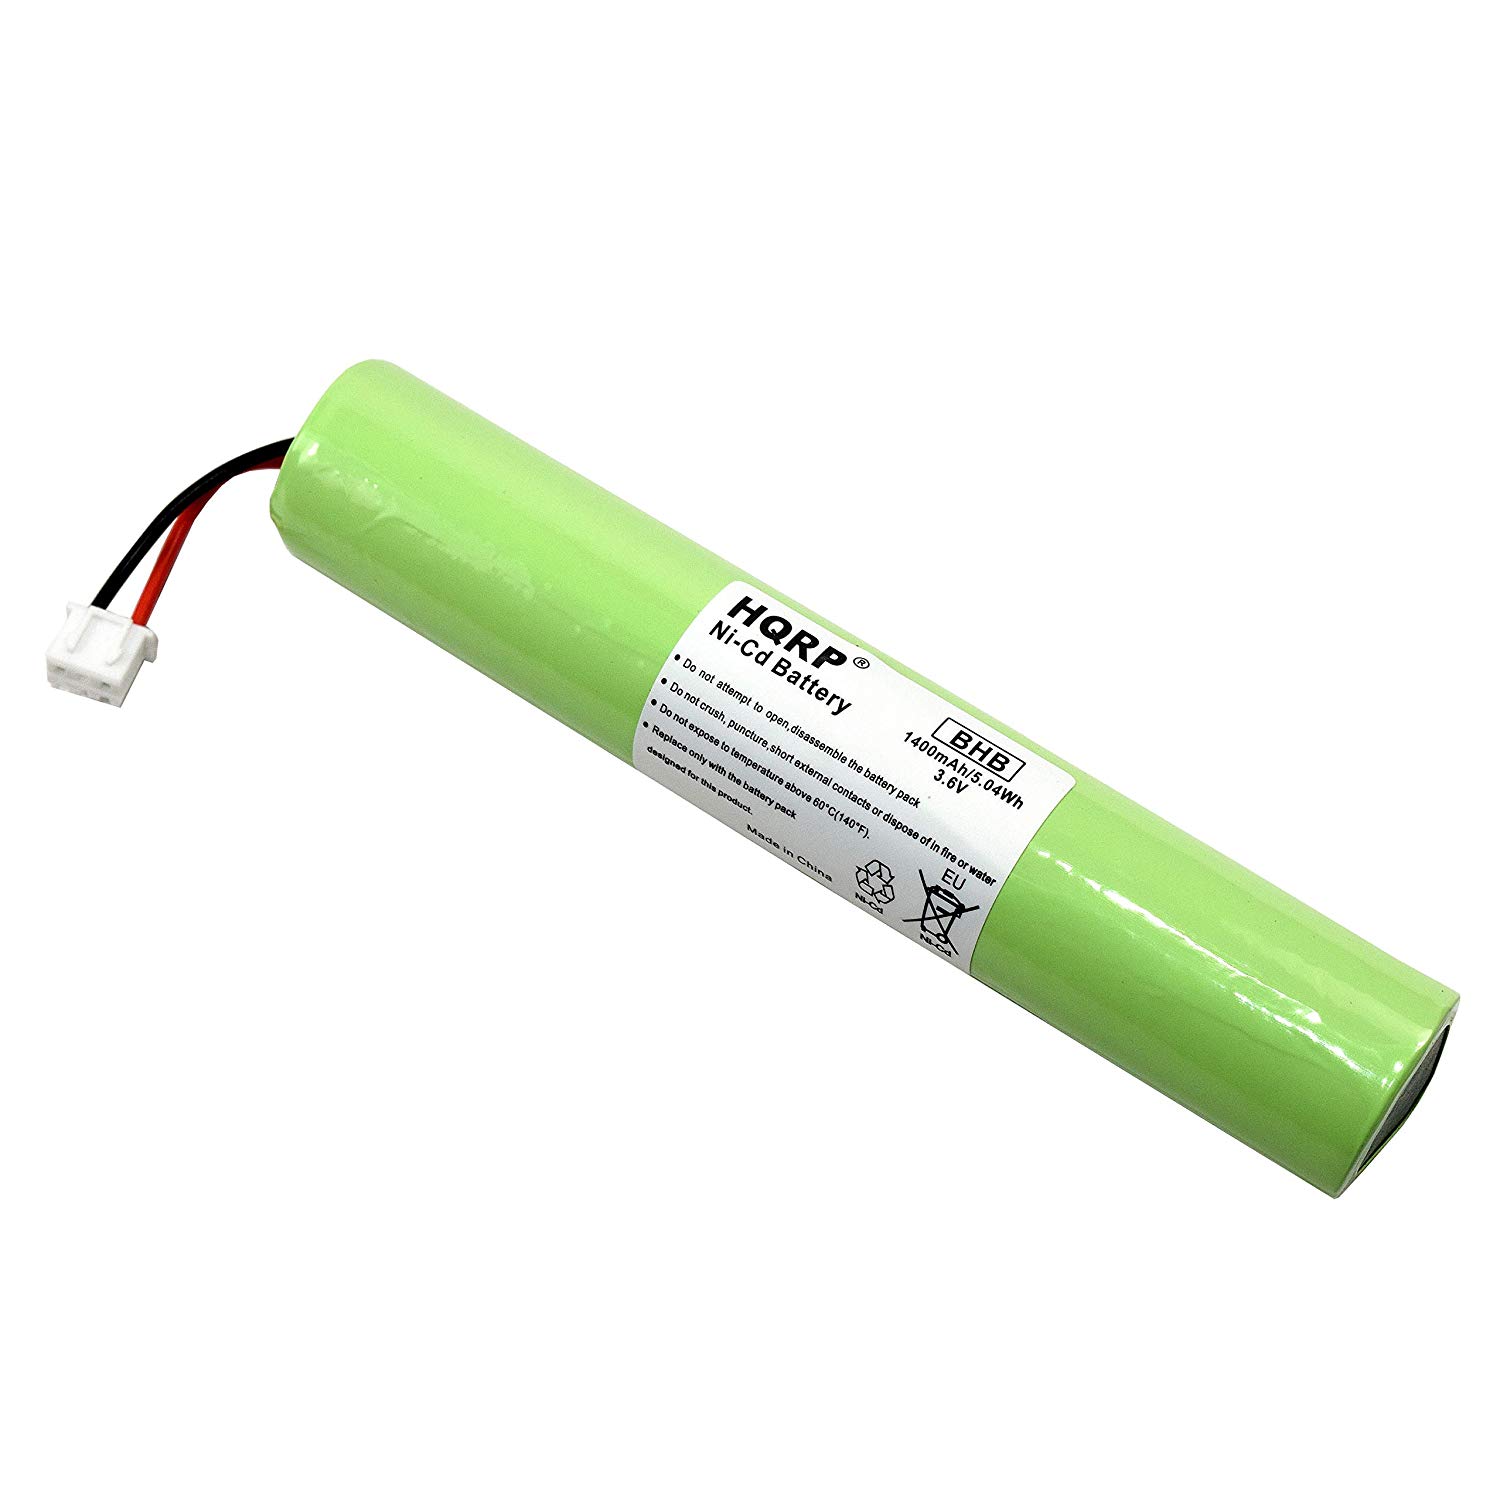 HQRP Battery for Hurricane Spin Scrubber Brush Cleaner Mop Spin-Scrubber Bathtub